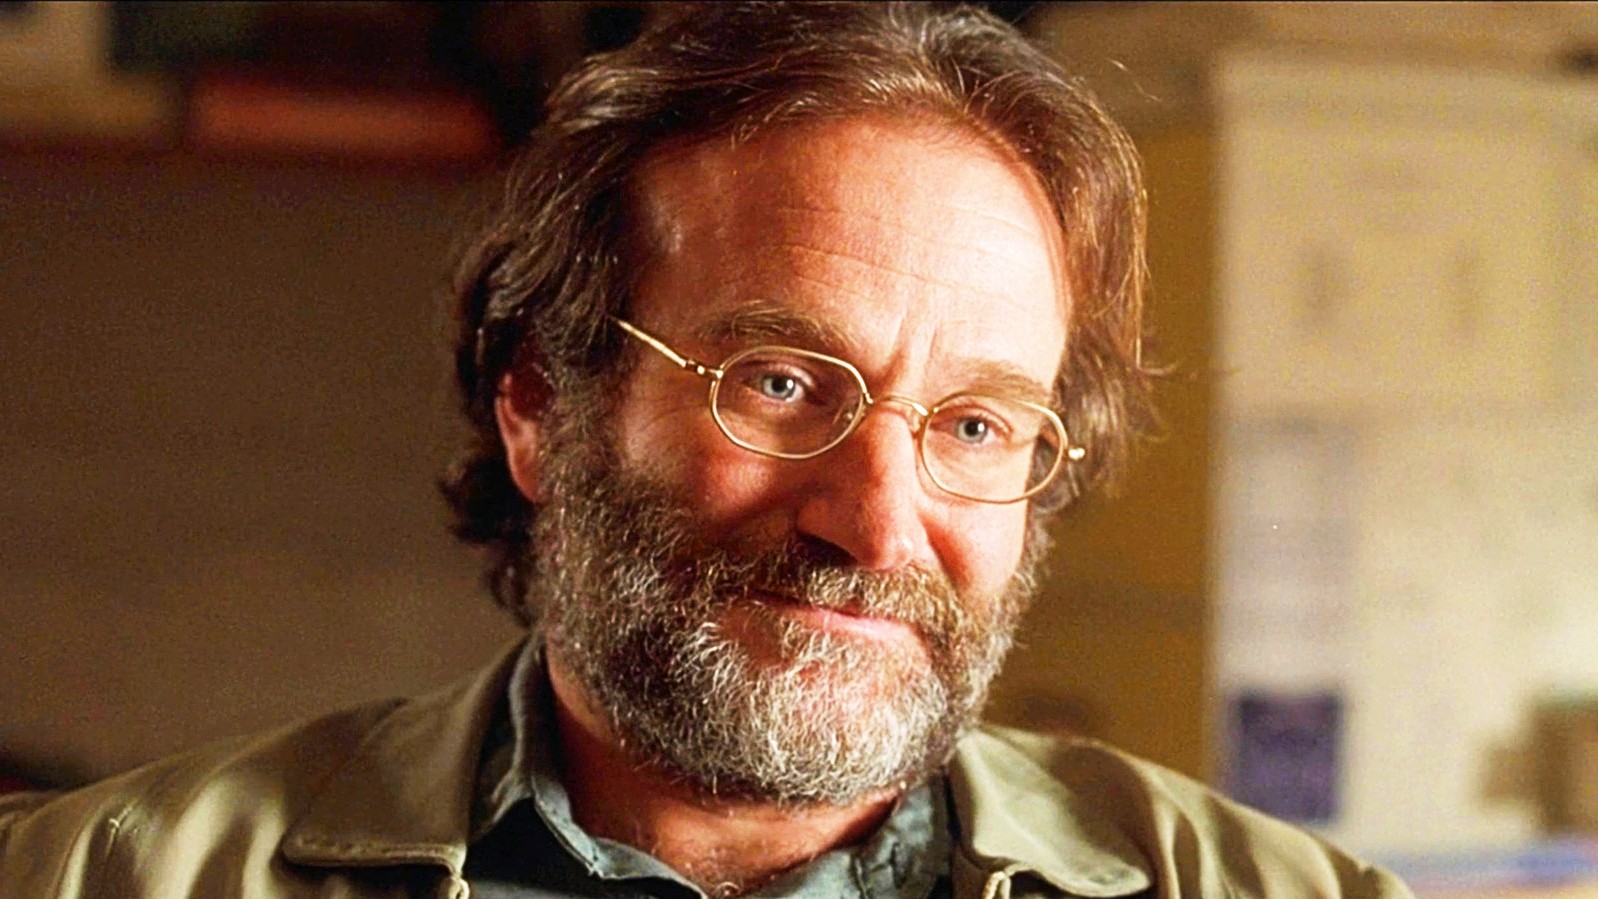 Robin Williams was only paid $75,000 instead of $8 million for his